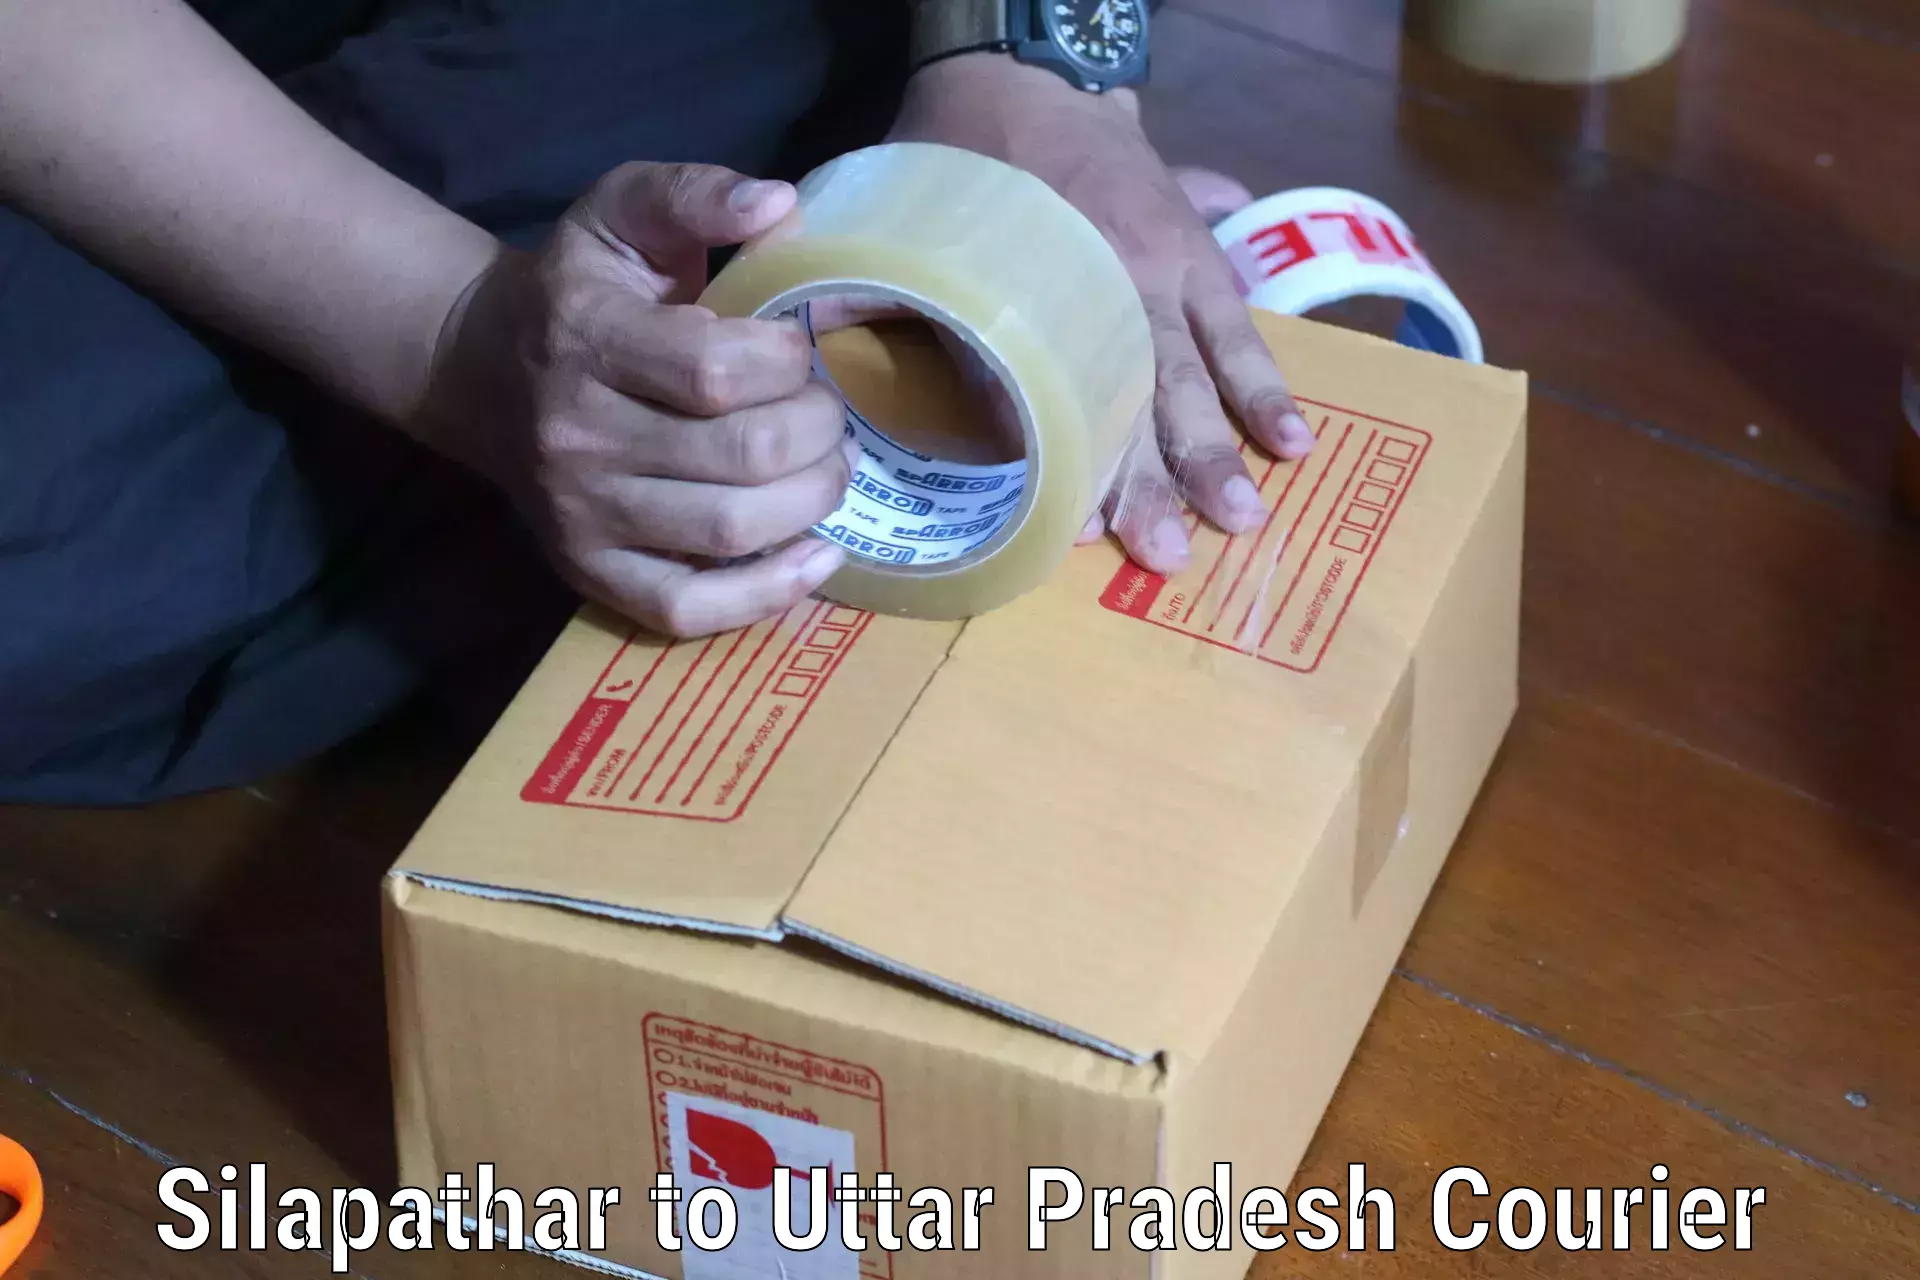 Courier service comparison Silapathar to Sitapur